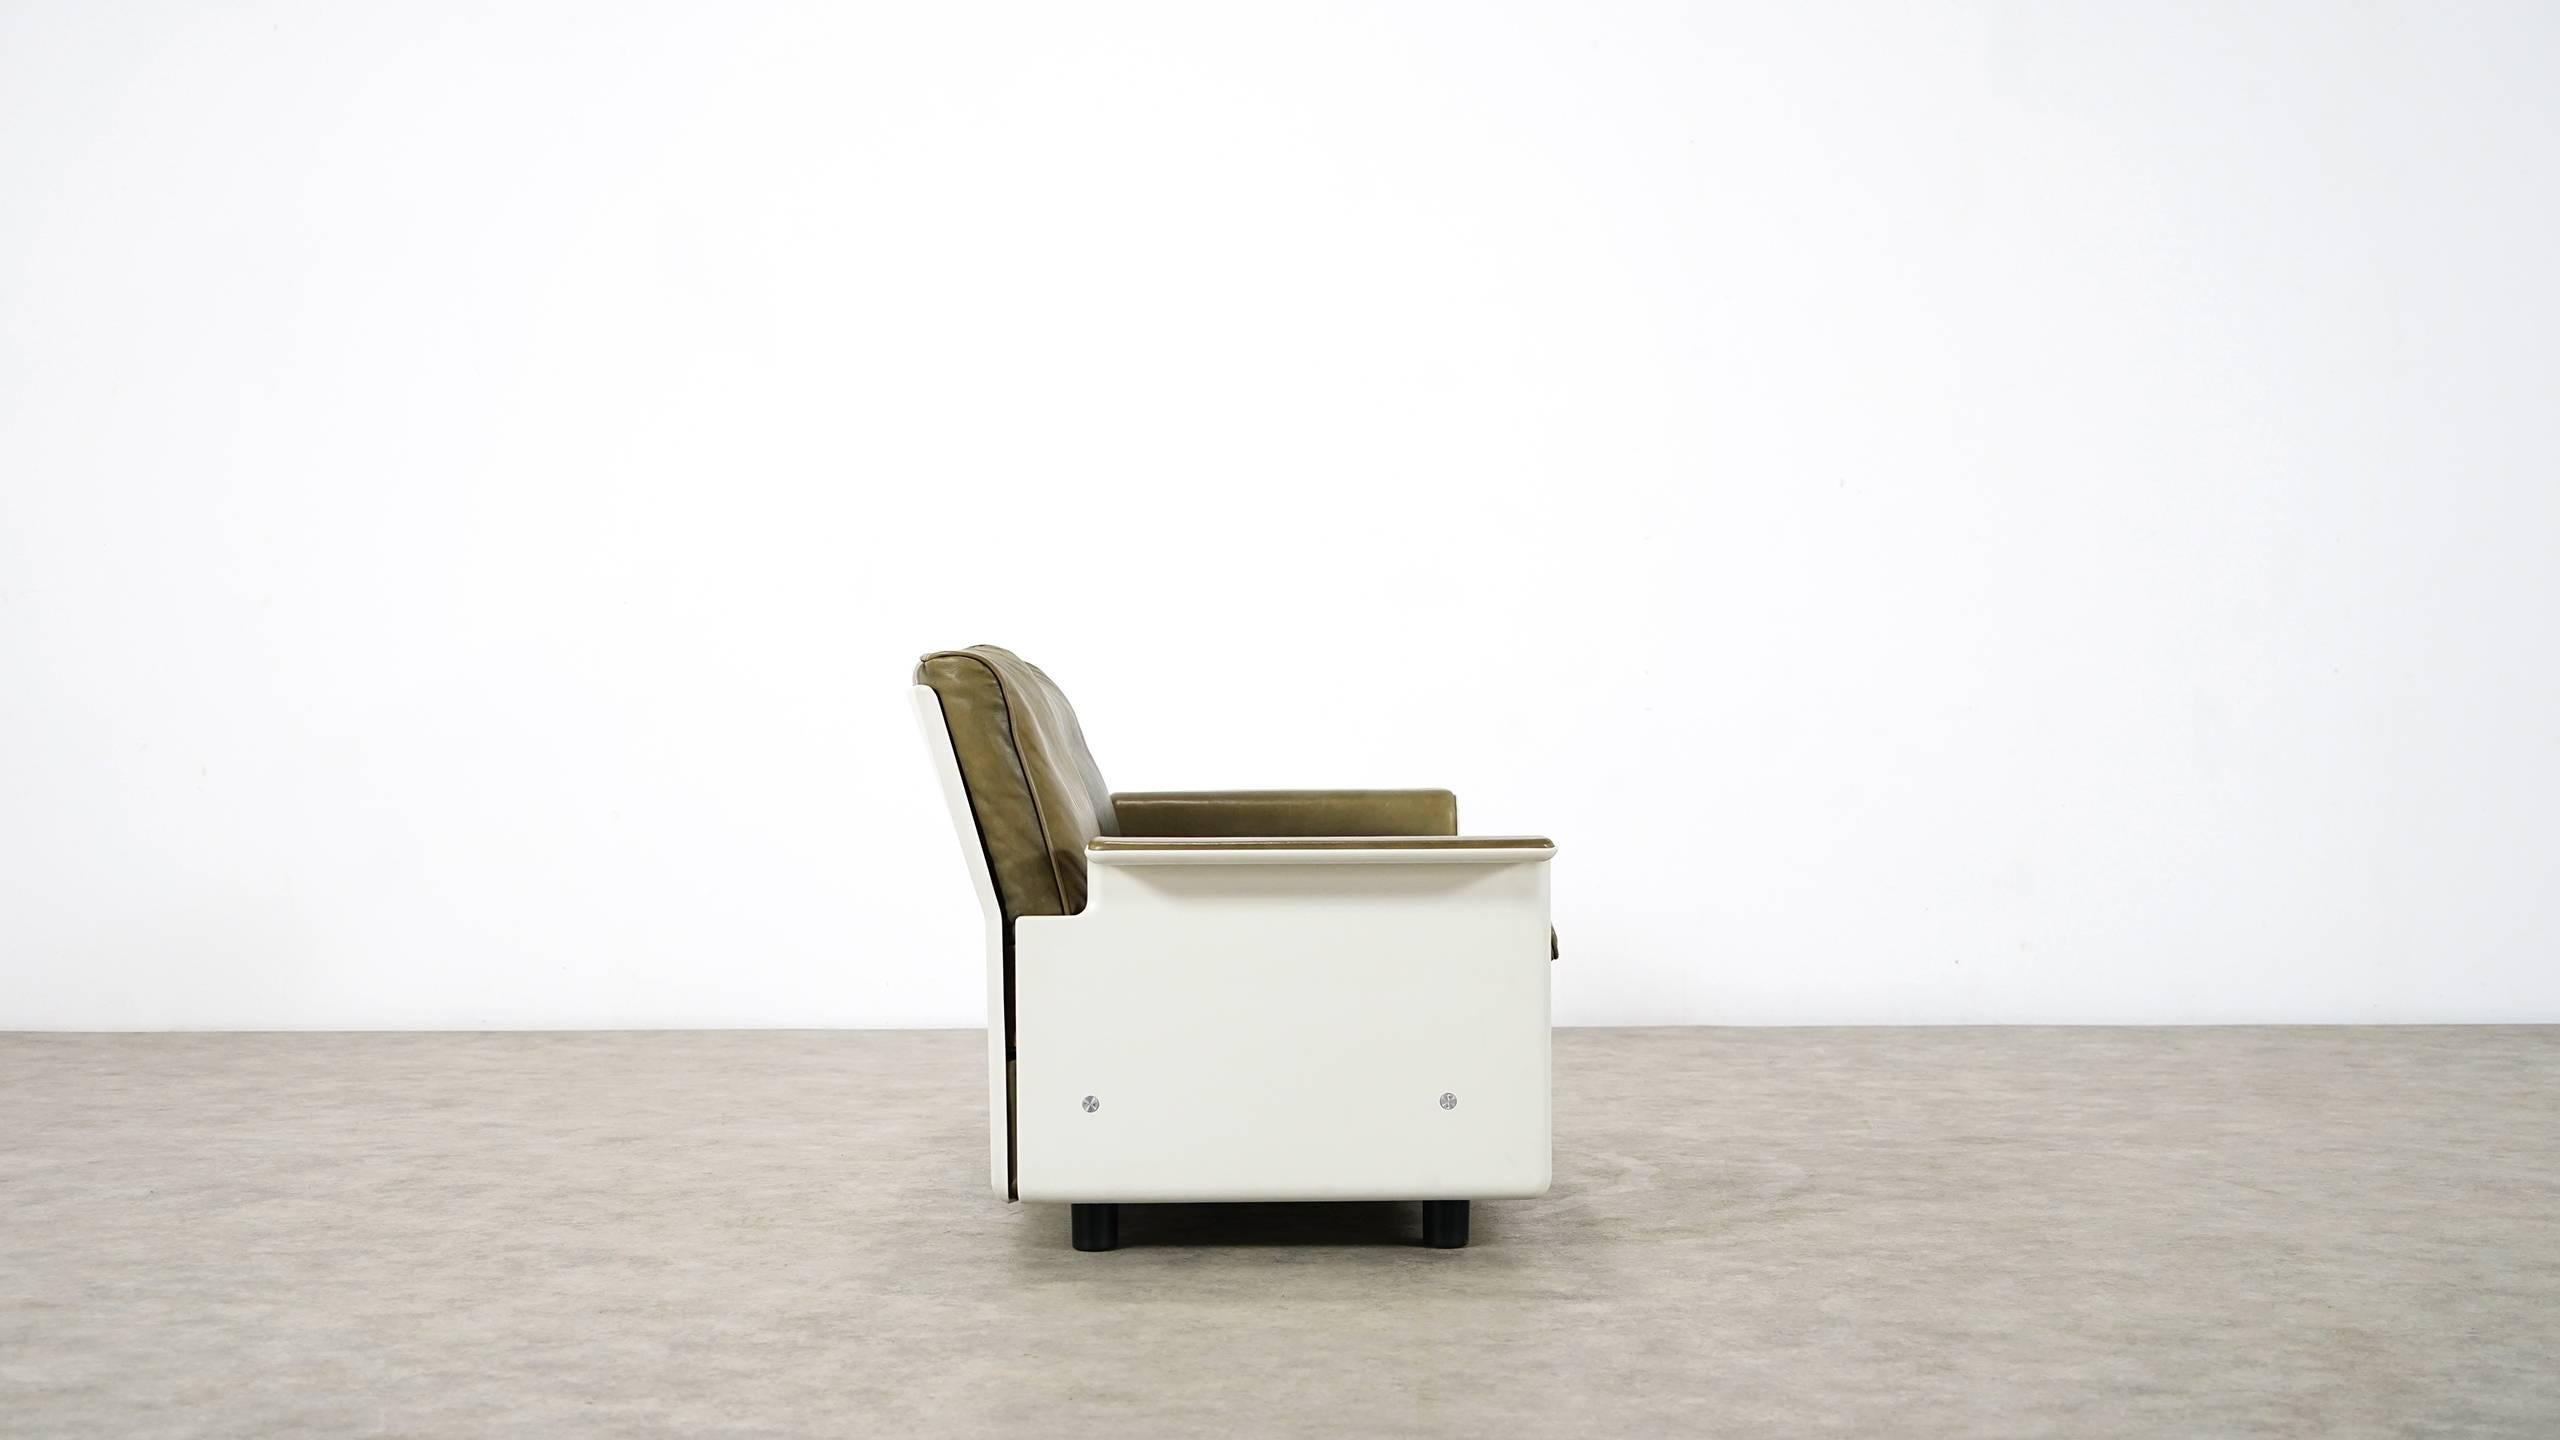 Dieter Rams, Sofa RZ 62 in Olivgreen Leather by Vitsœ, Two-Seat 7